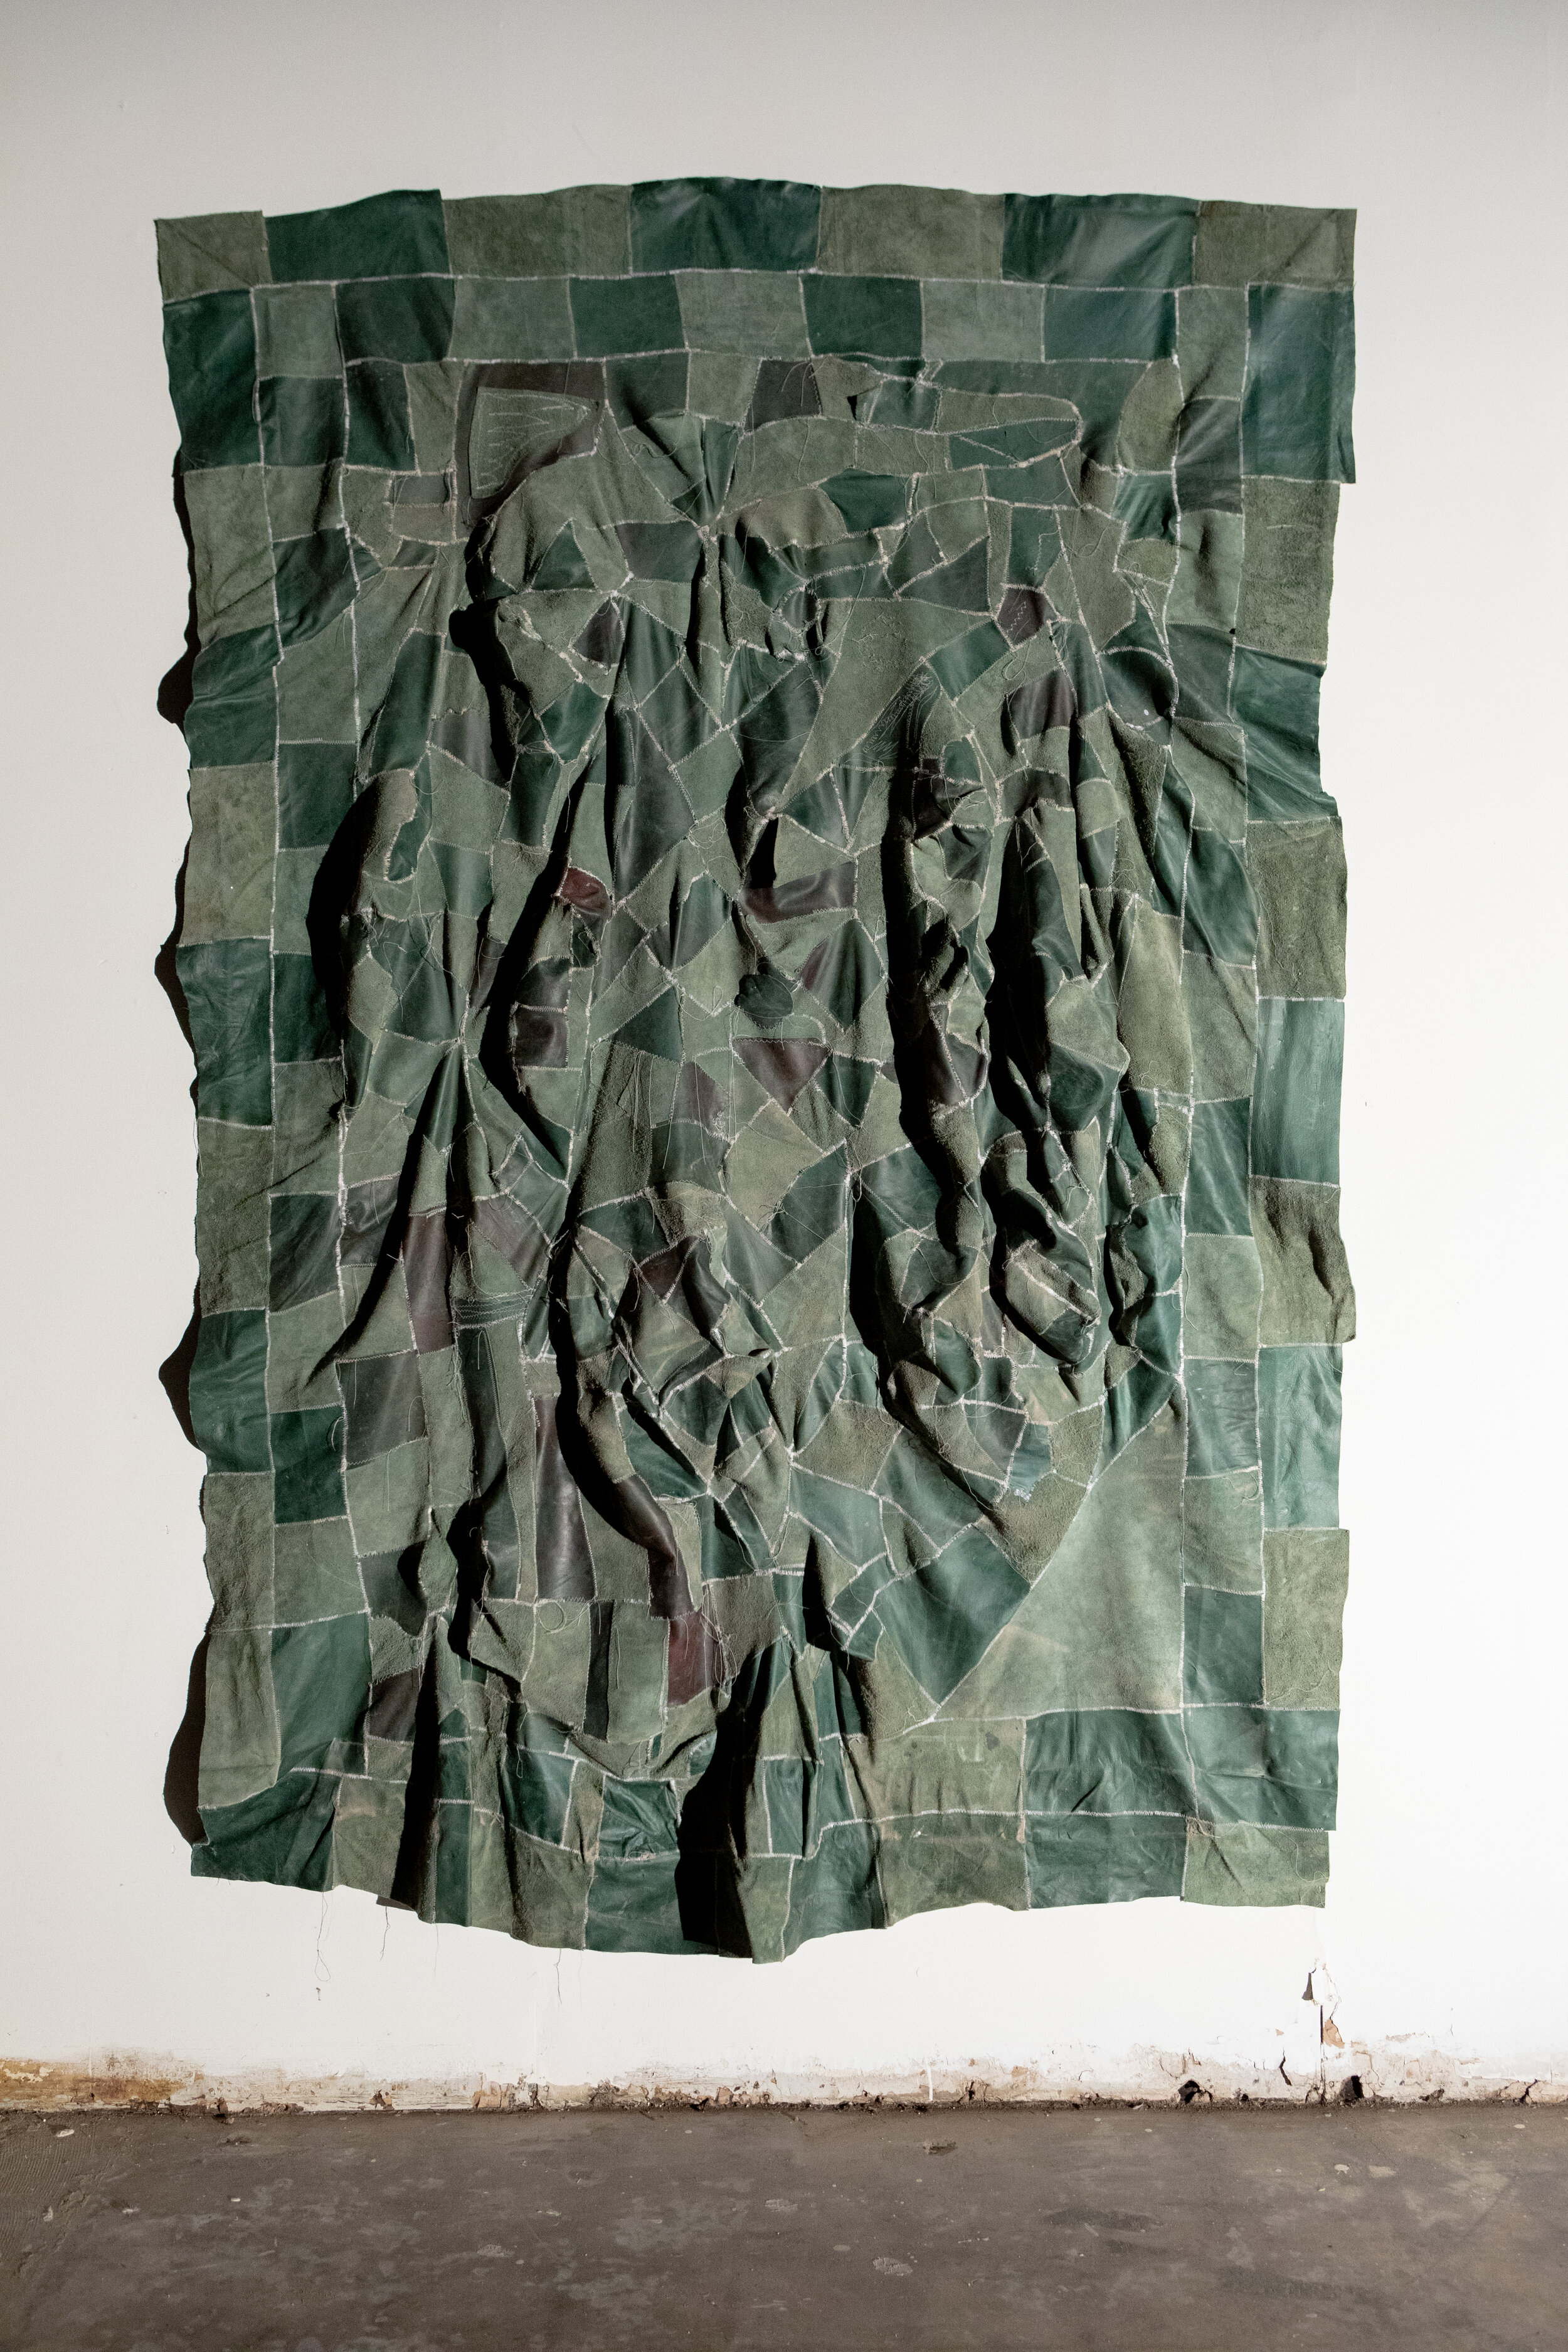  Tontono National Forrest (SOFT SCULPTURES)  Leather &amp; Thread  10’ x 7’ Feet  2020 